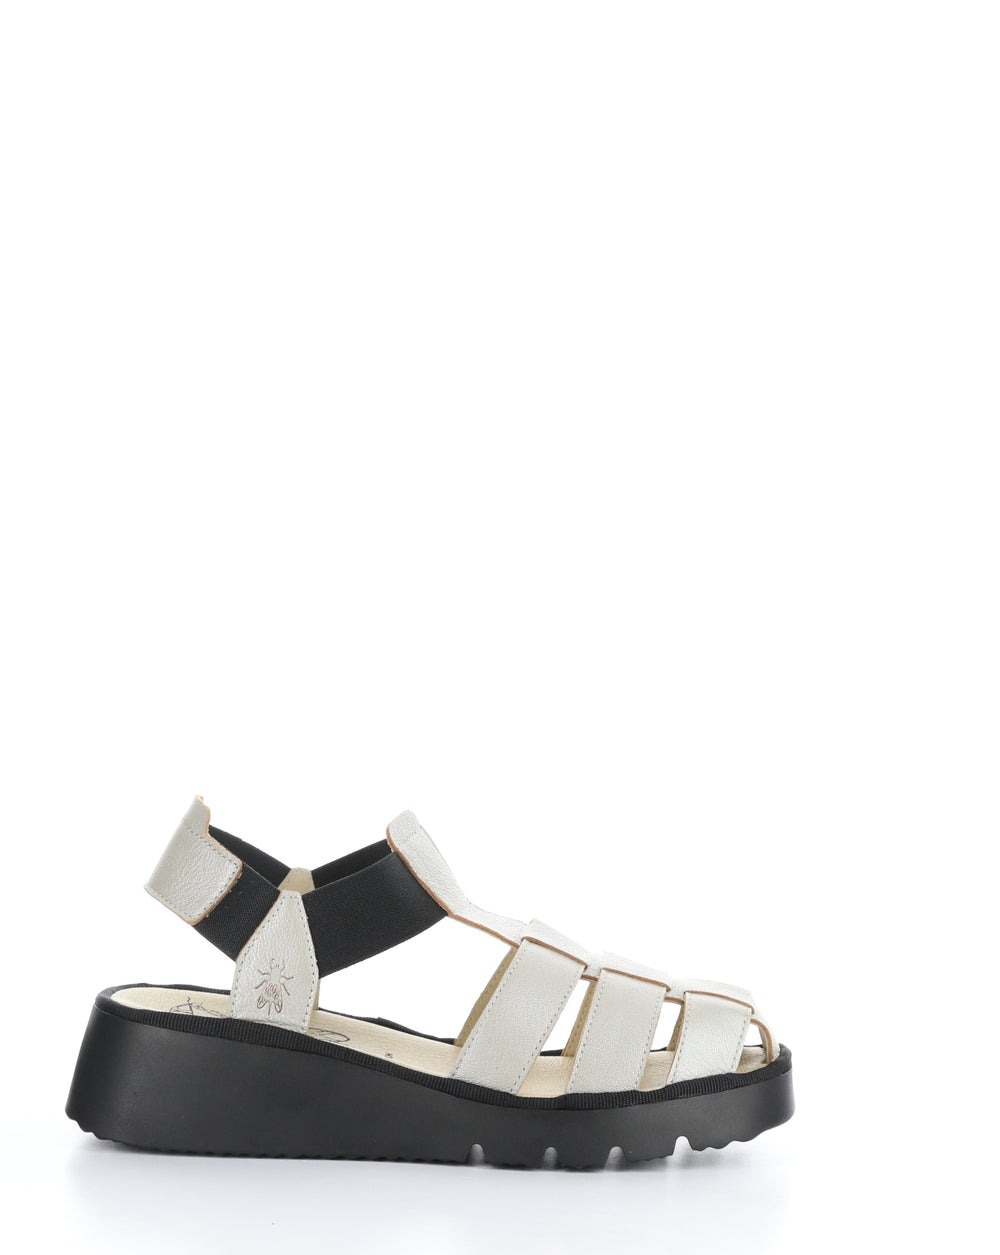 PEFI429FLY 003 SILVER Elasticated Sandals